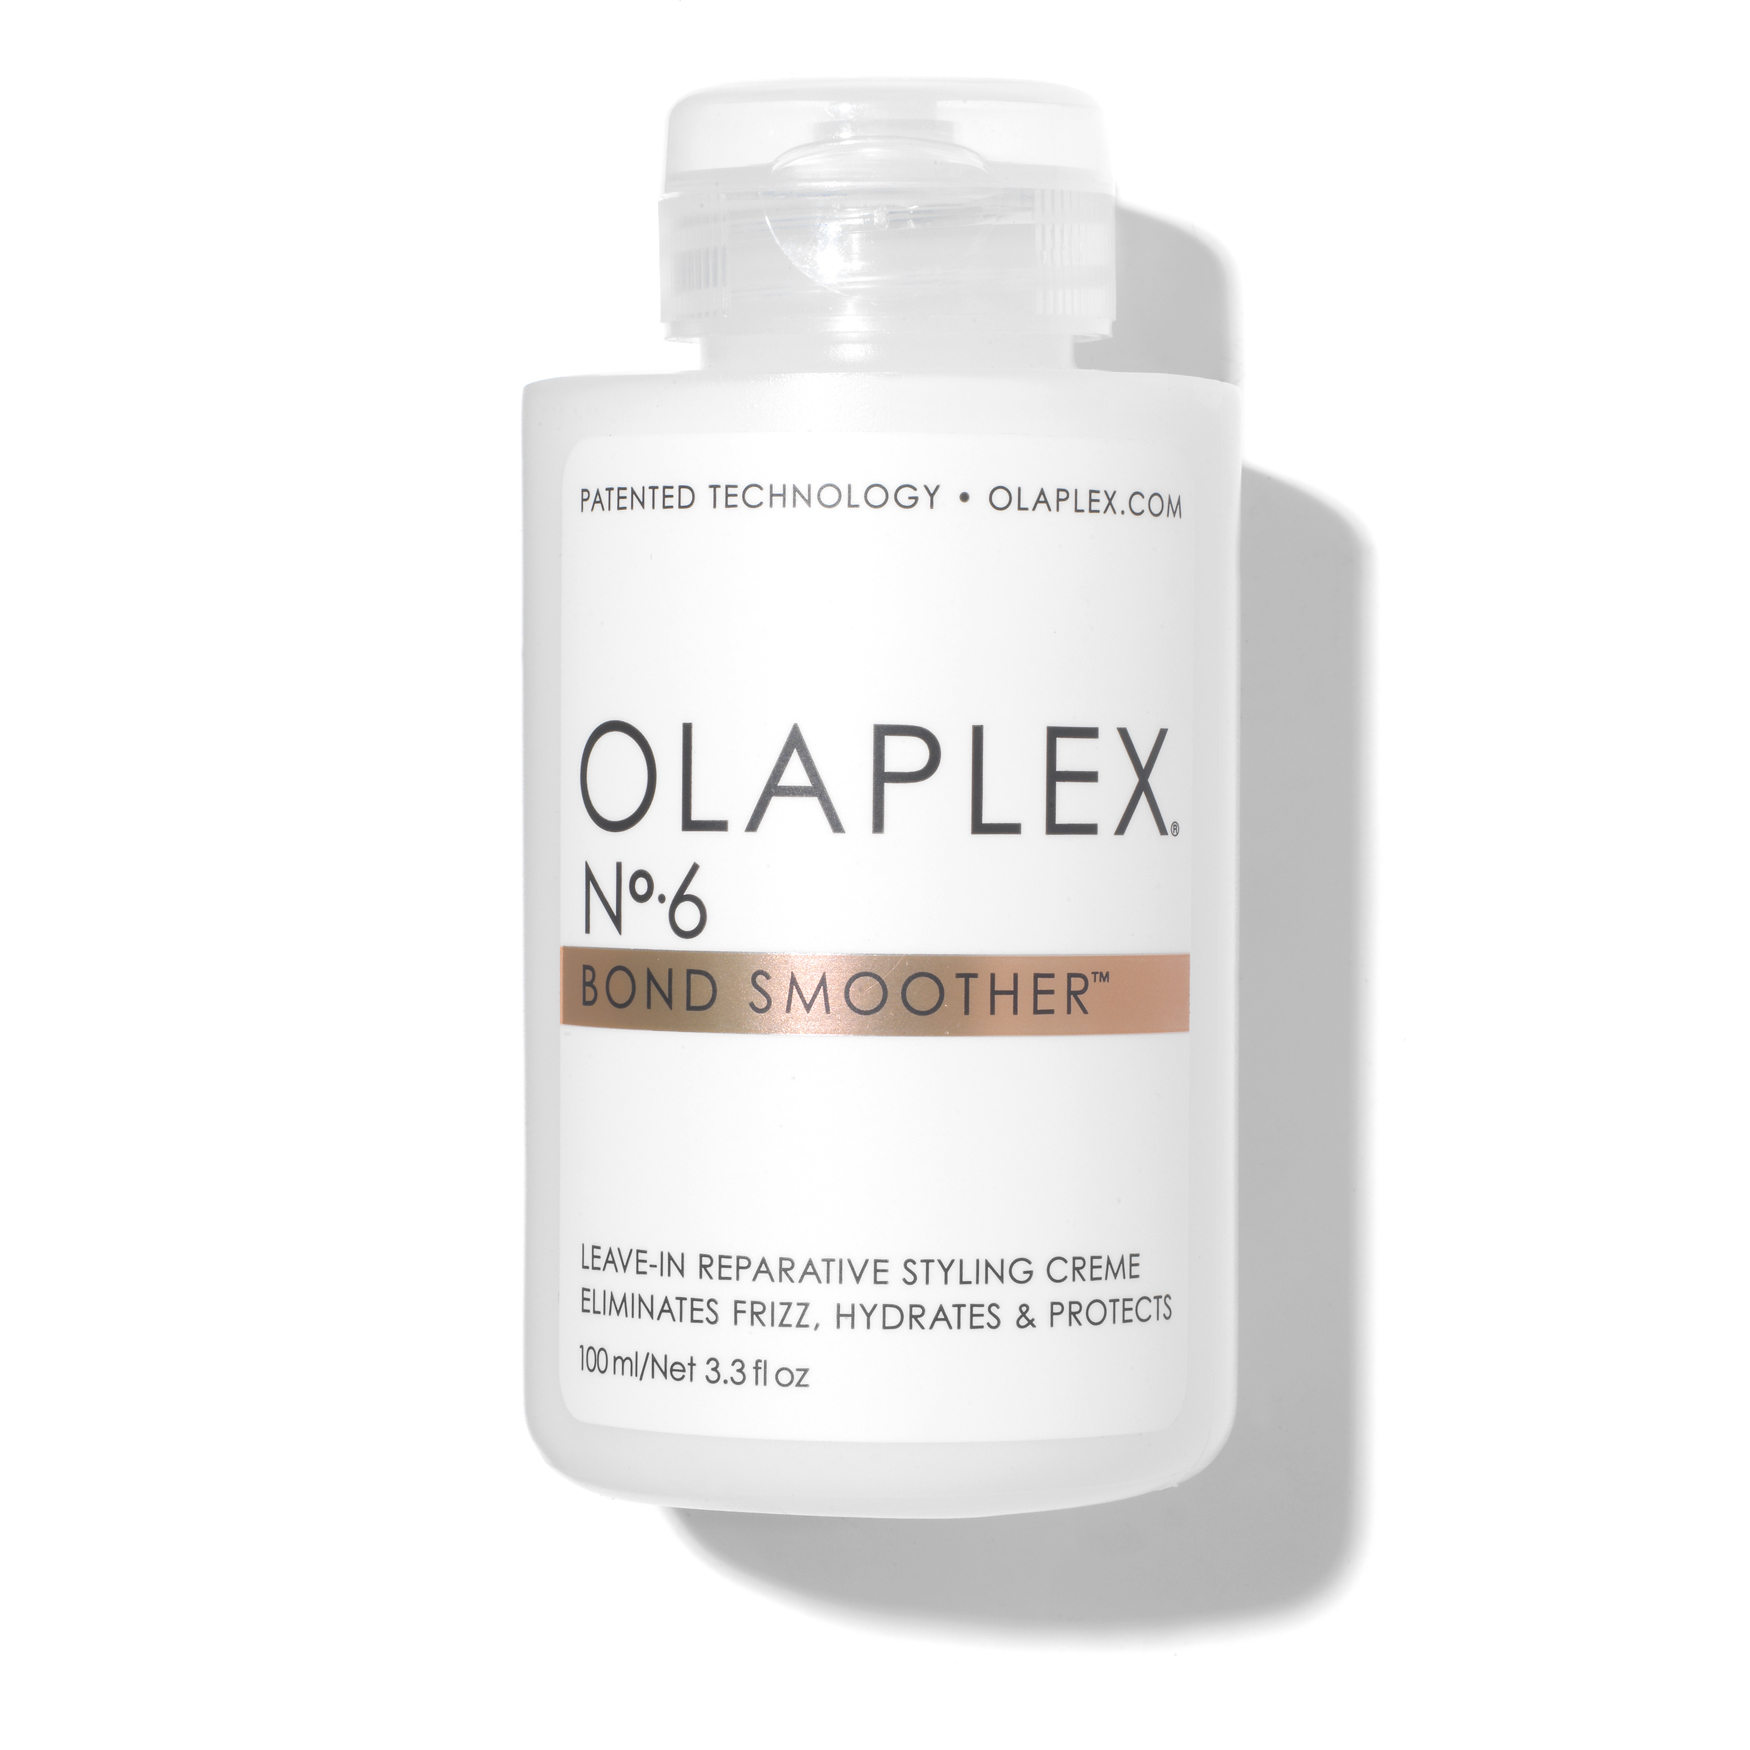 Olaplex: Everything You Need To Know About This Iconic Haircare Brand